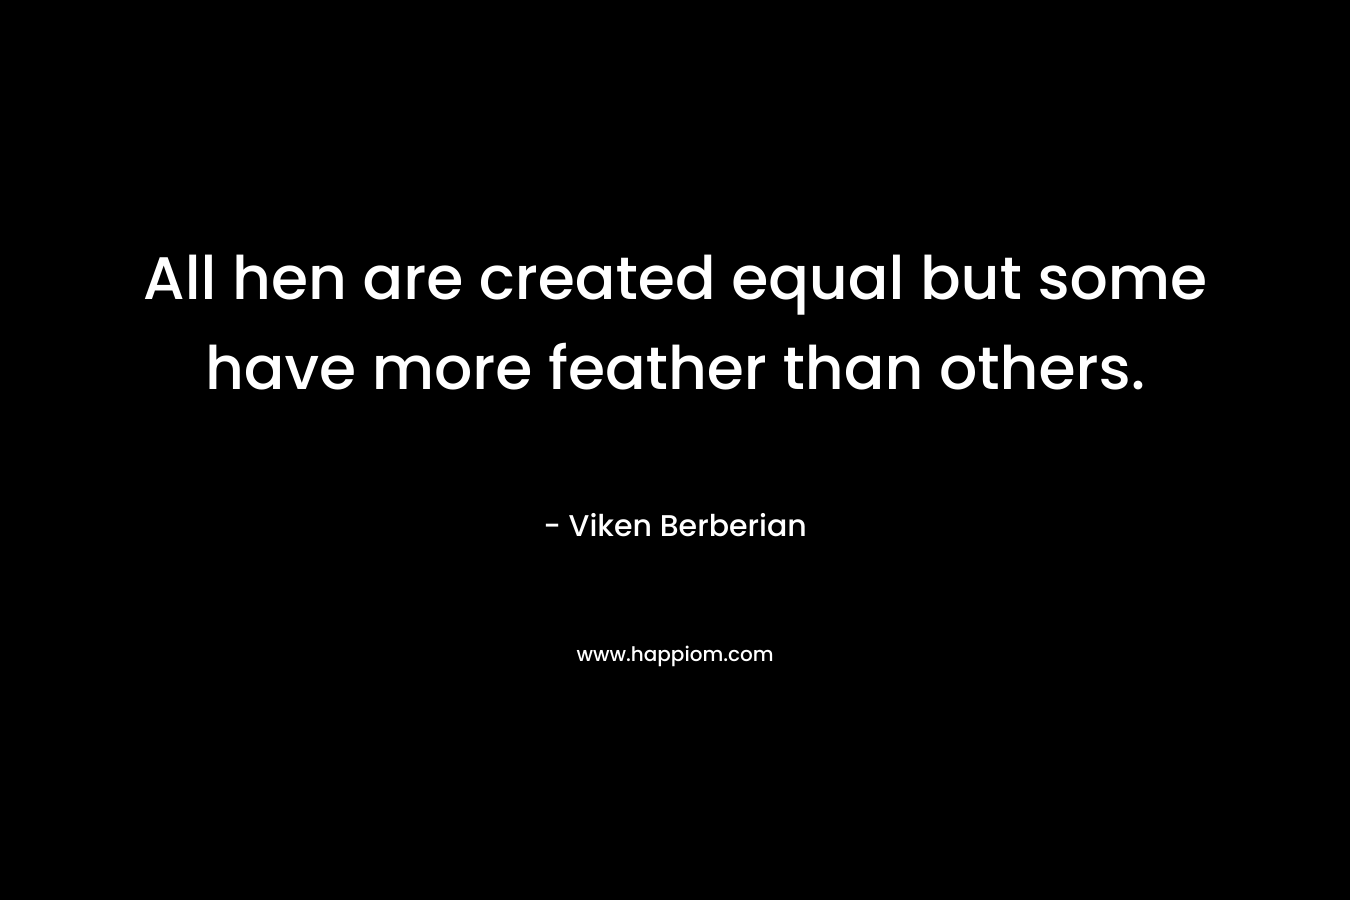 All hen are created equal but some have more feather than others.